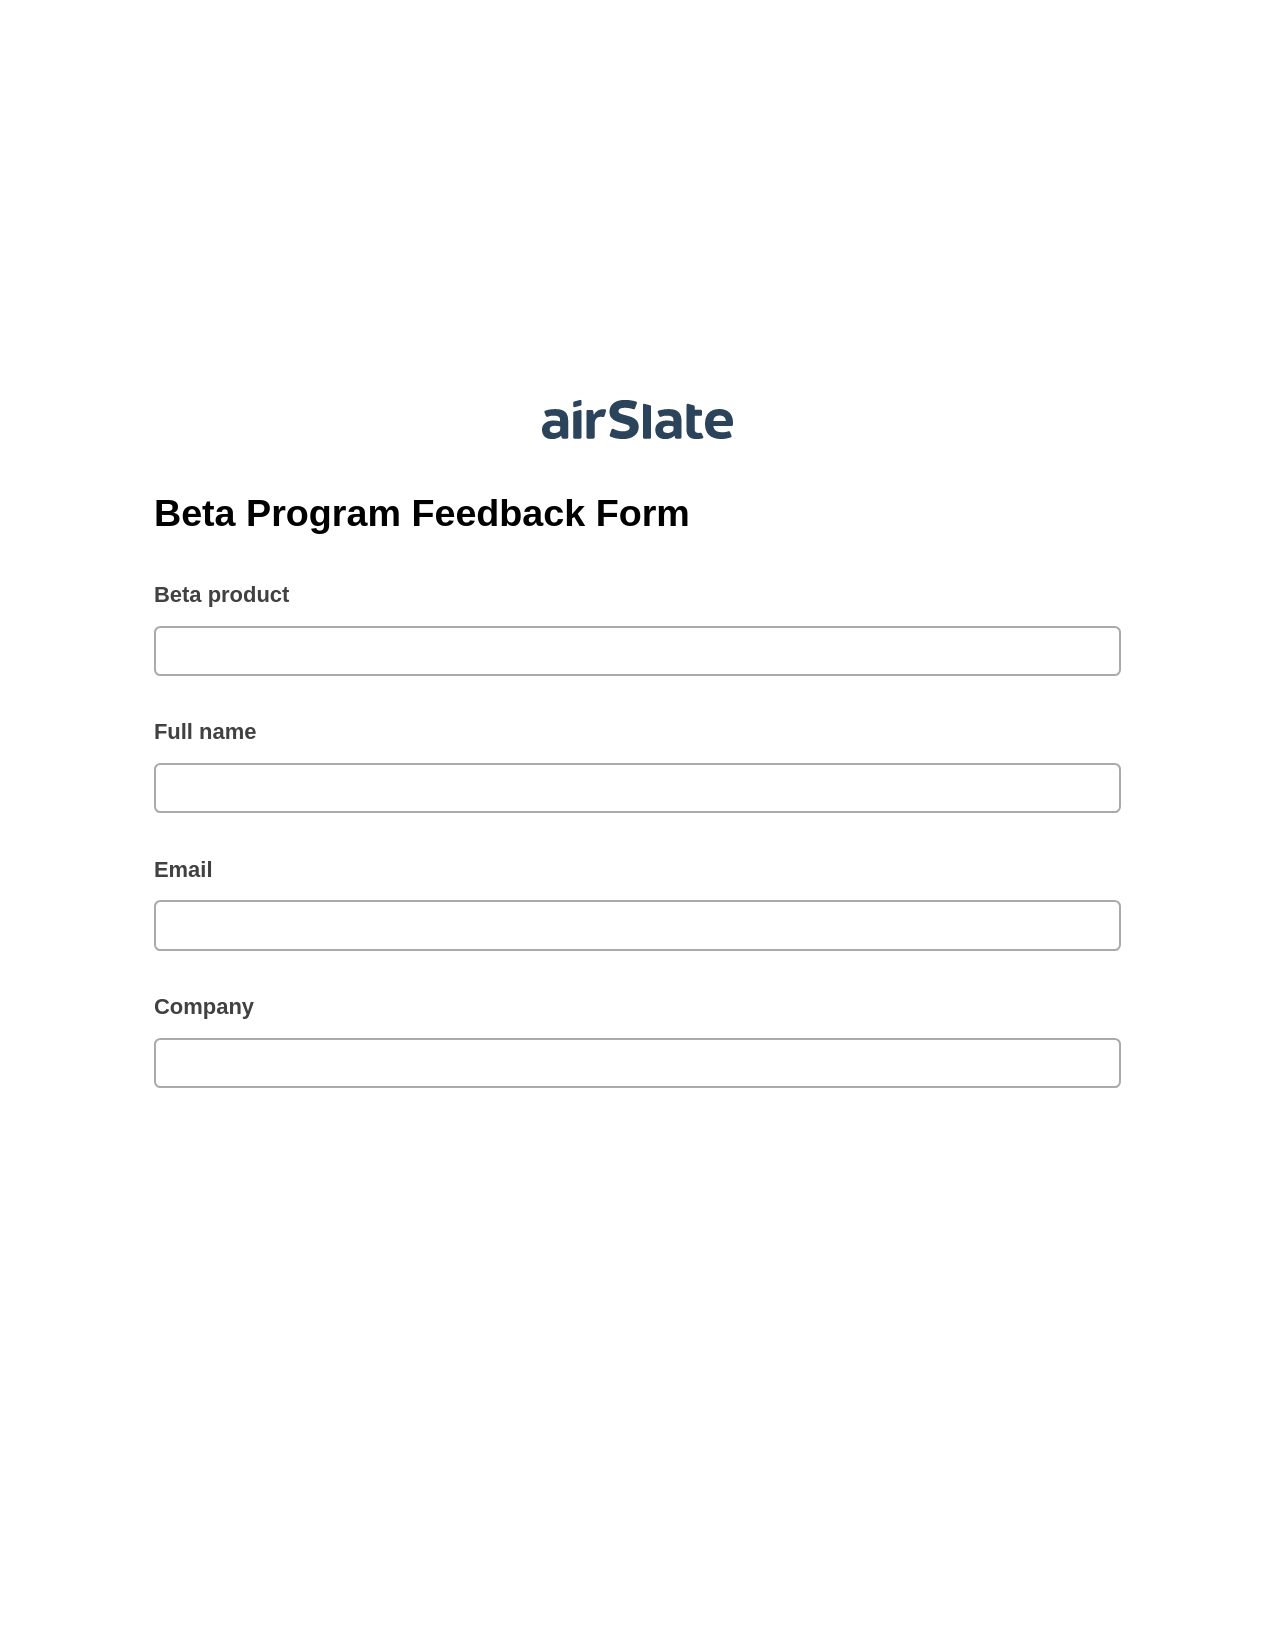 Multirole Beta Program Feedback Form Pre-fill from another Slate Bot, Reminder Bot, Post-finish Document Bot